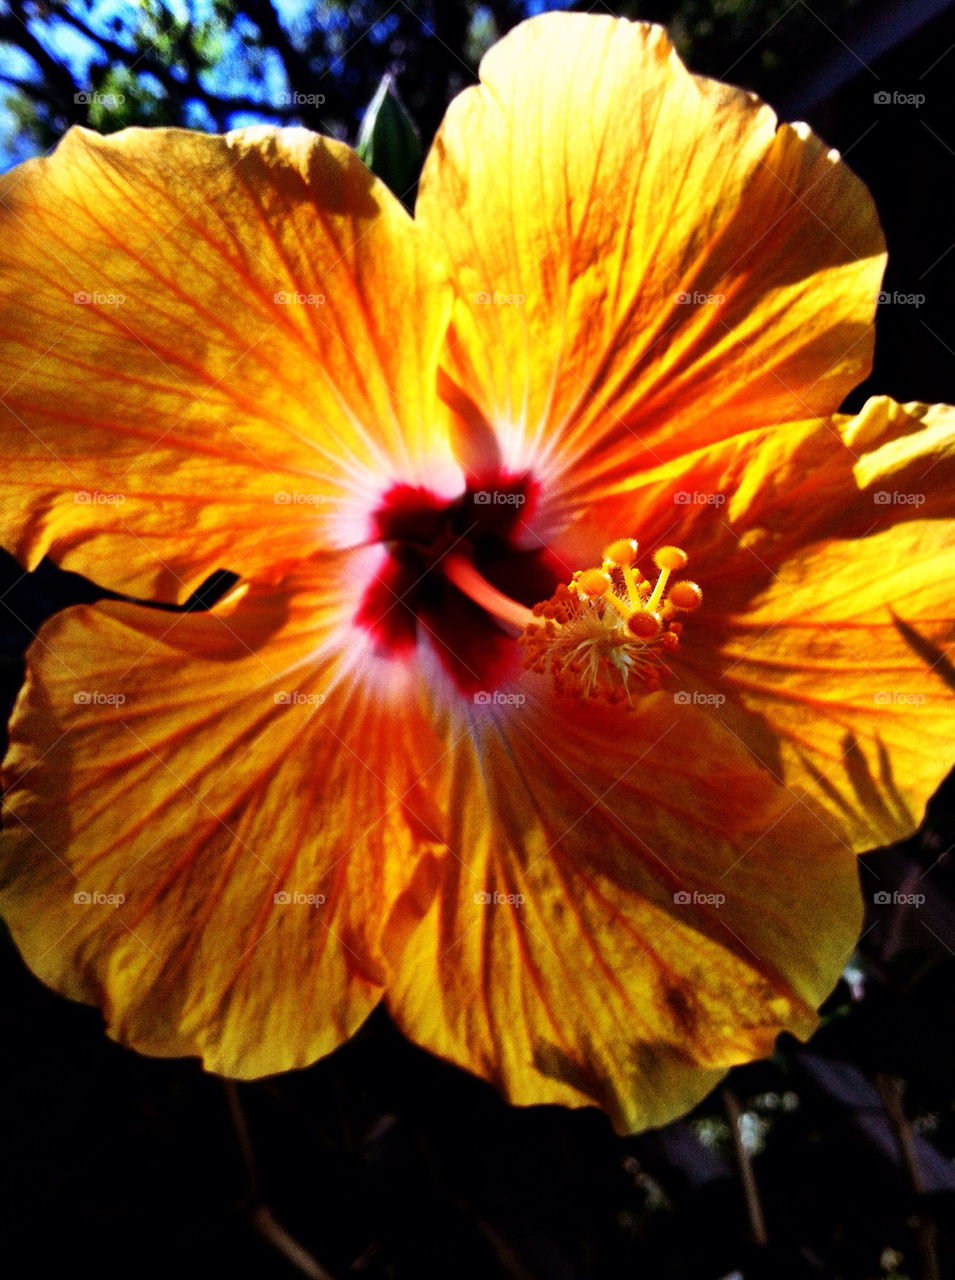 flower summer colourful hibiscus by wmm1969